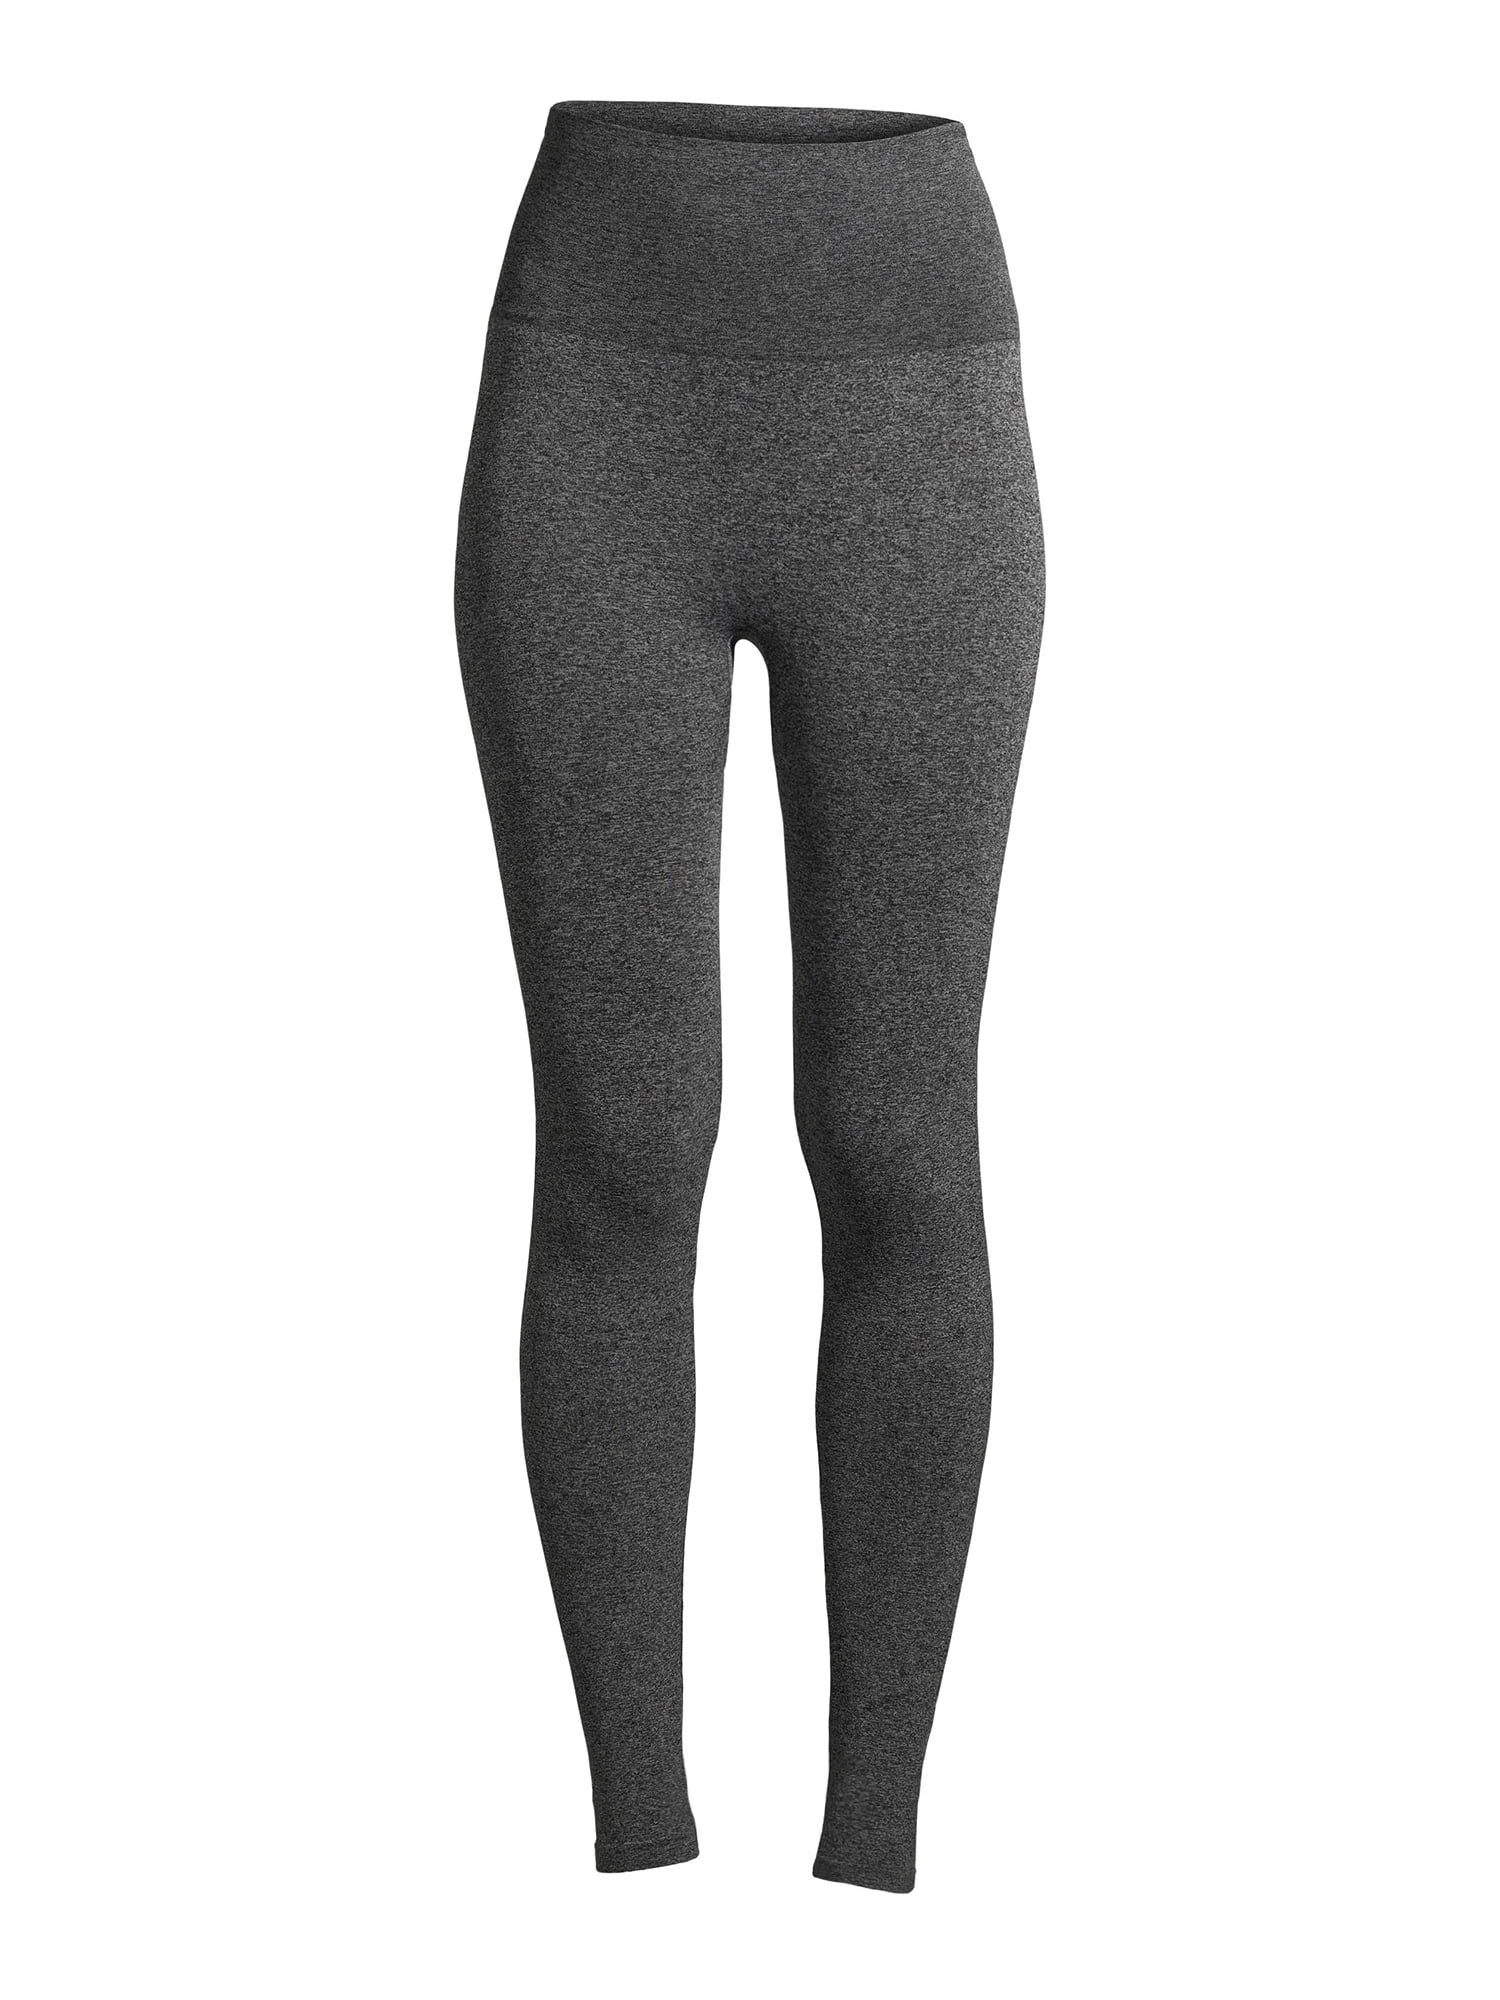 Warner’s No Muffin Top Leggings Sm/Med Seamless Textured Gray New 220847